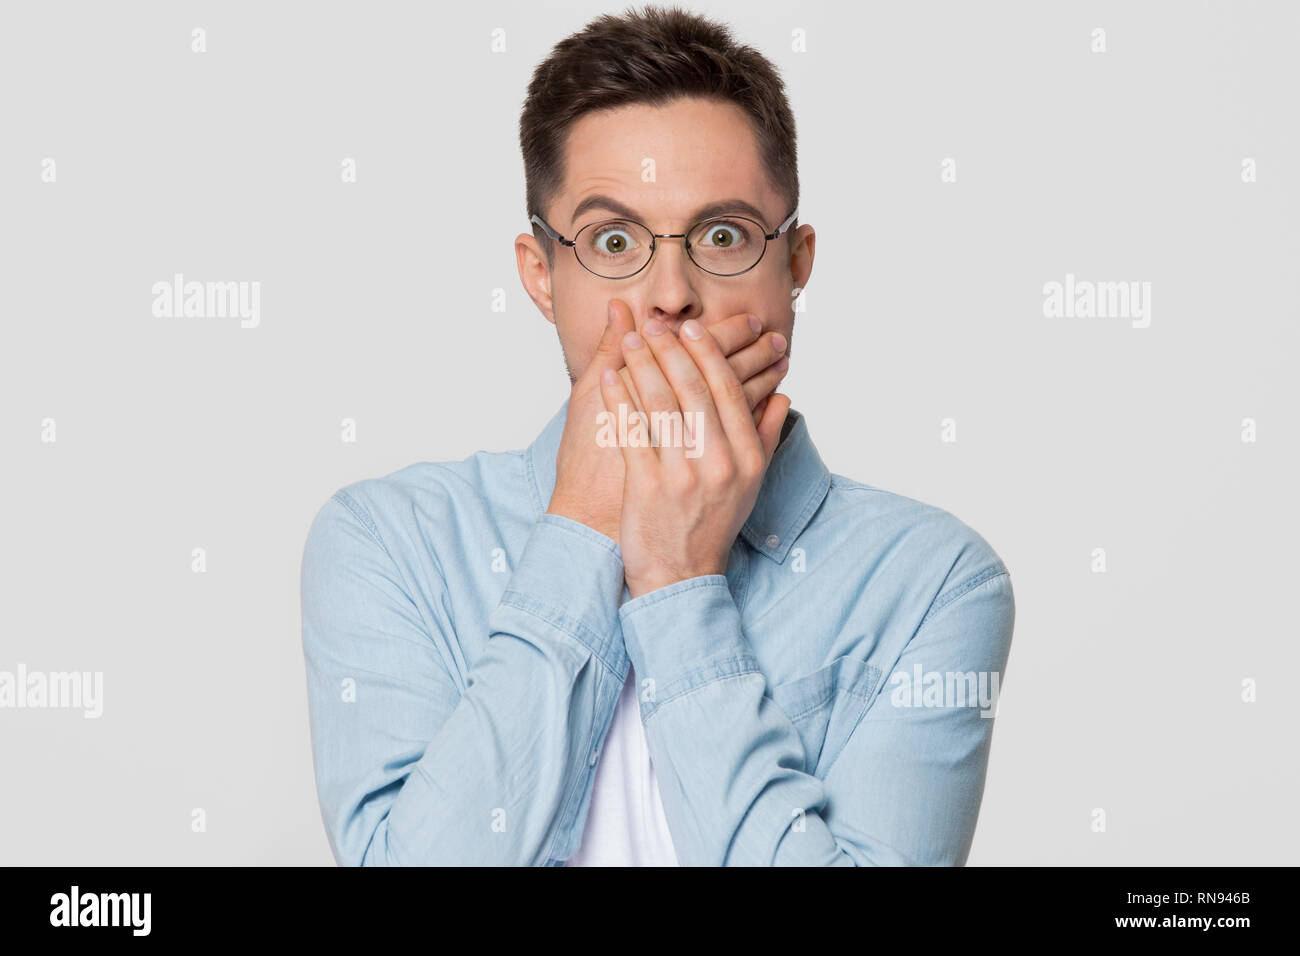 Shocked scared man with surprised face covering mouth with hands Stock Photo